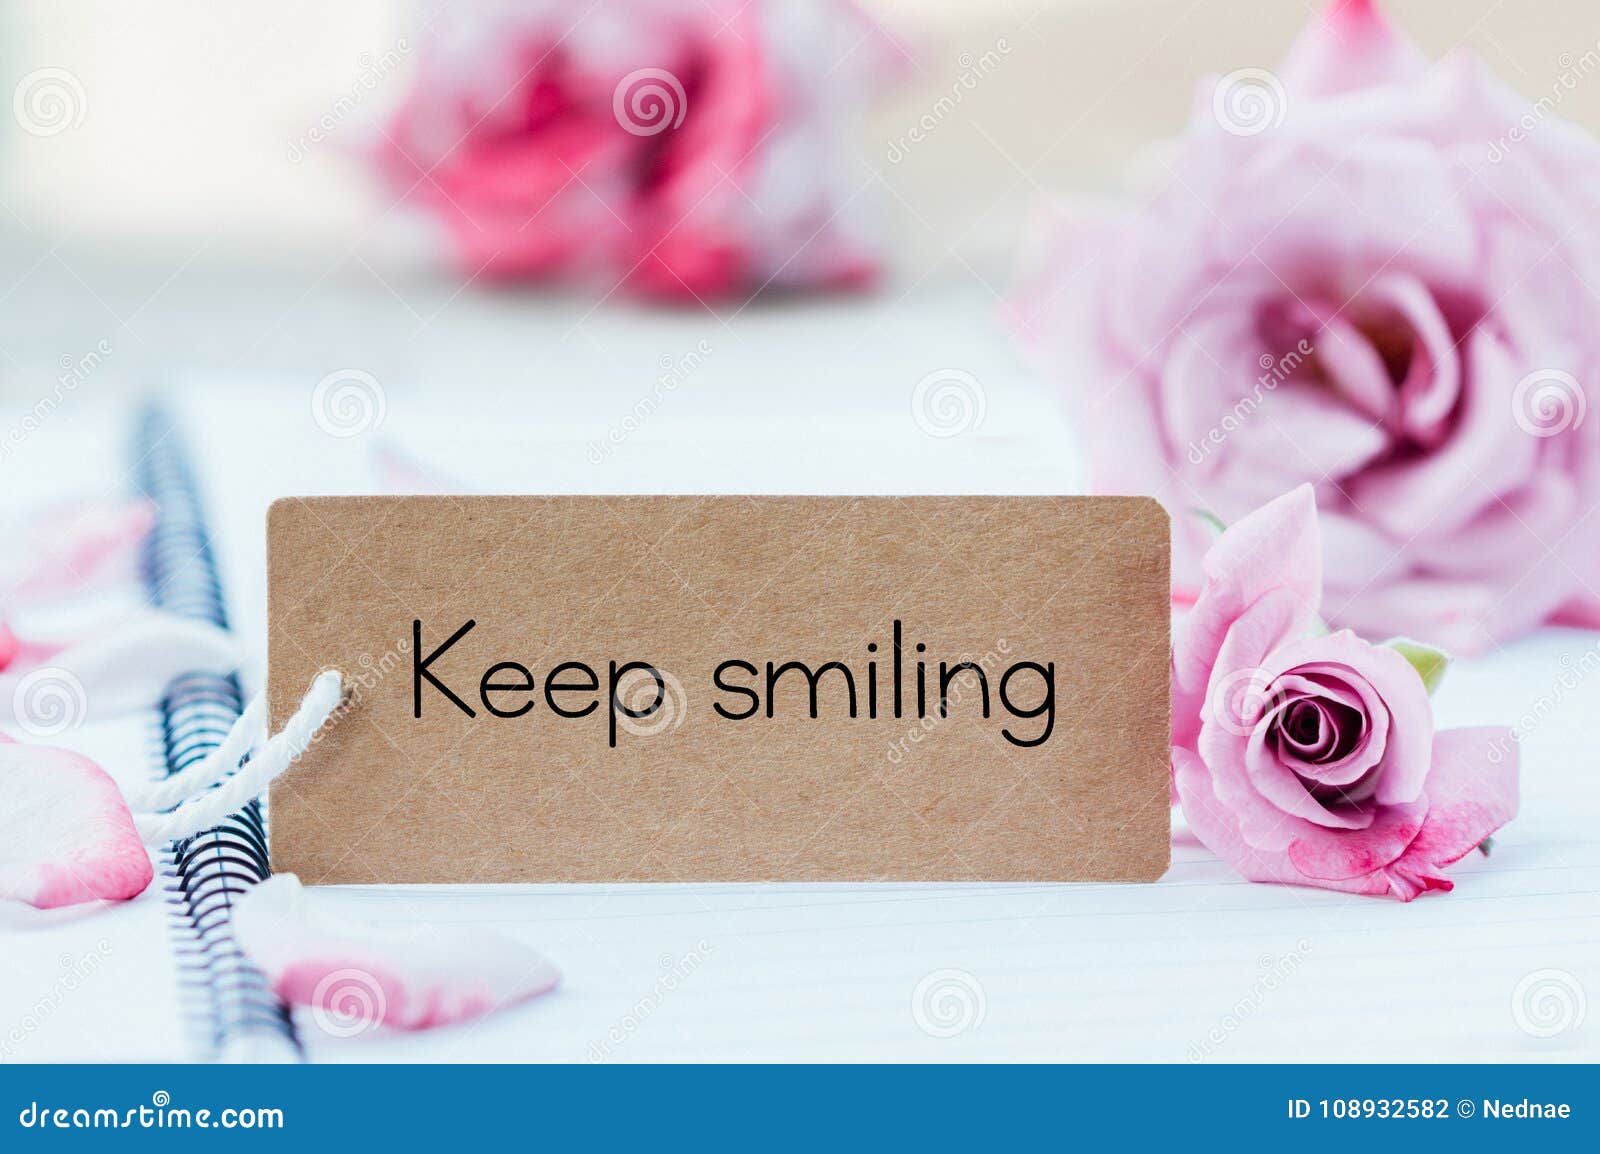 Writing Keep Smiling on Card Stock Photo - Image of text, word ...